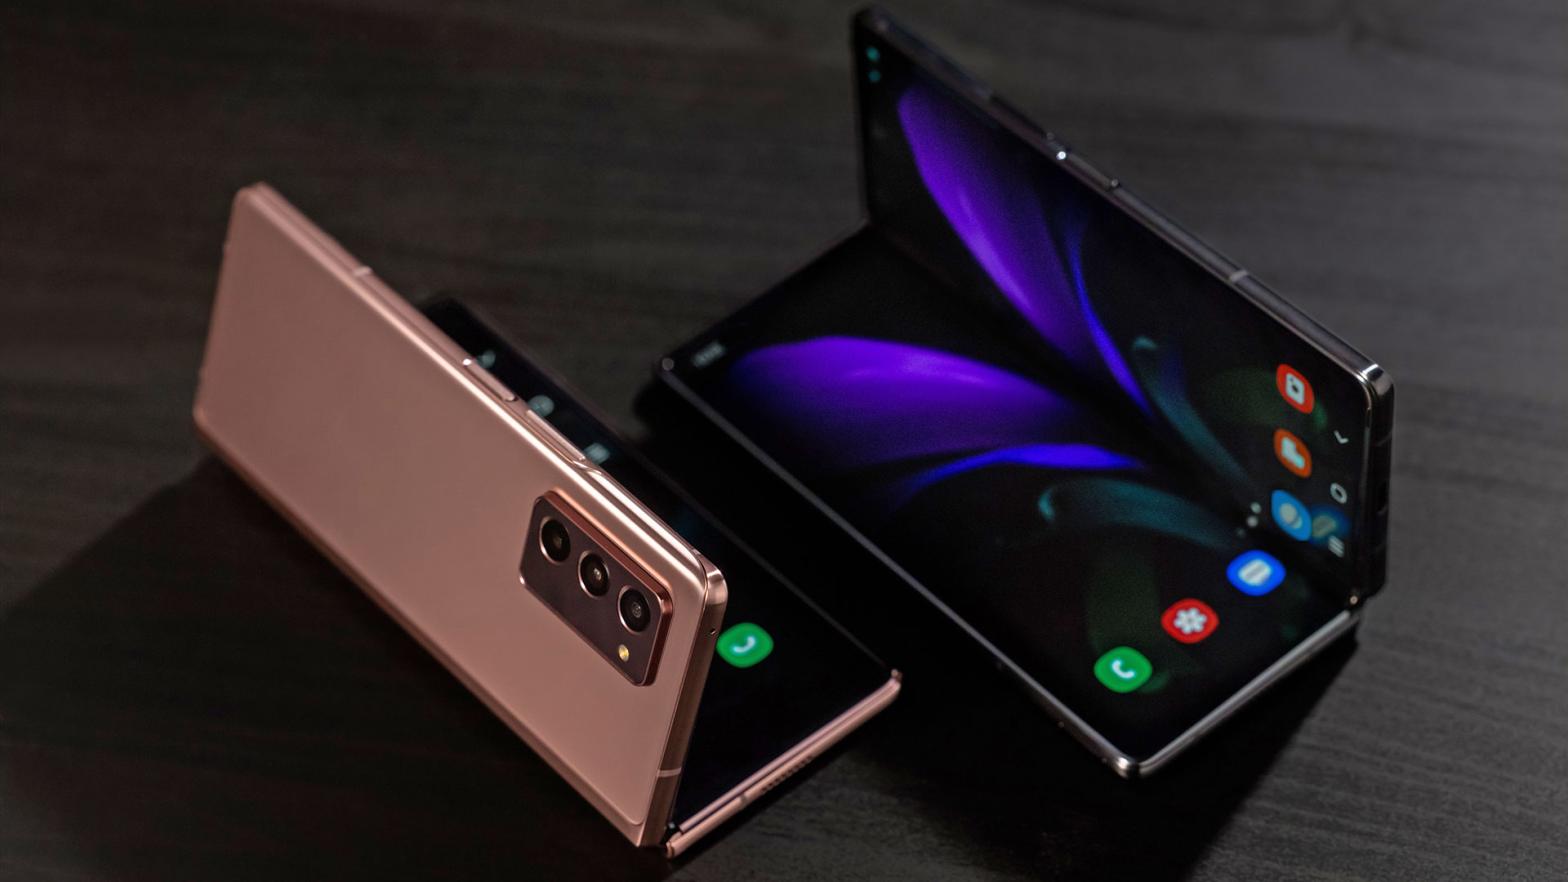 Samsung has announced that the Z Fold 2 will officially be available for pre-order on September 2, with sales going live on September 18.  (Photo: Samsung)